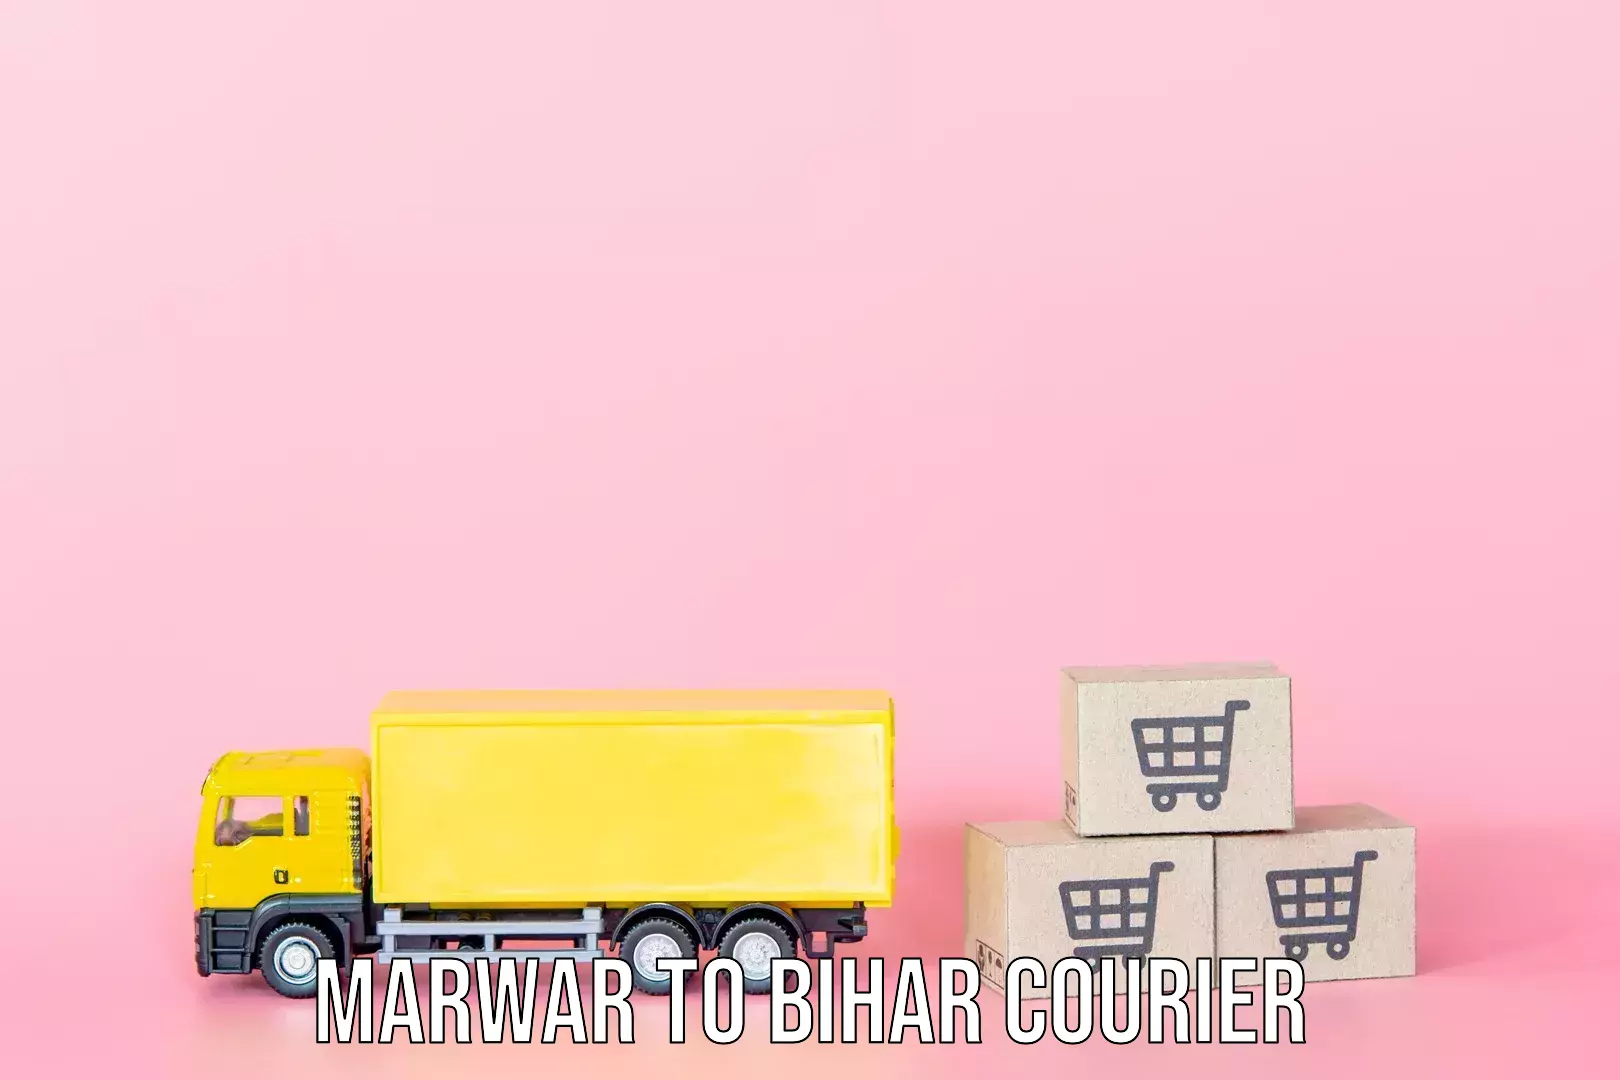 Luggage delivery optimization in Marwar to Bihar